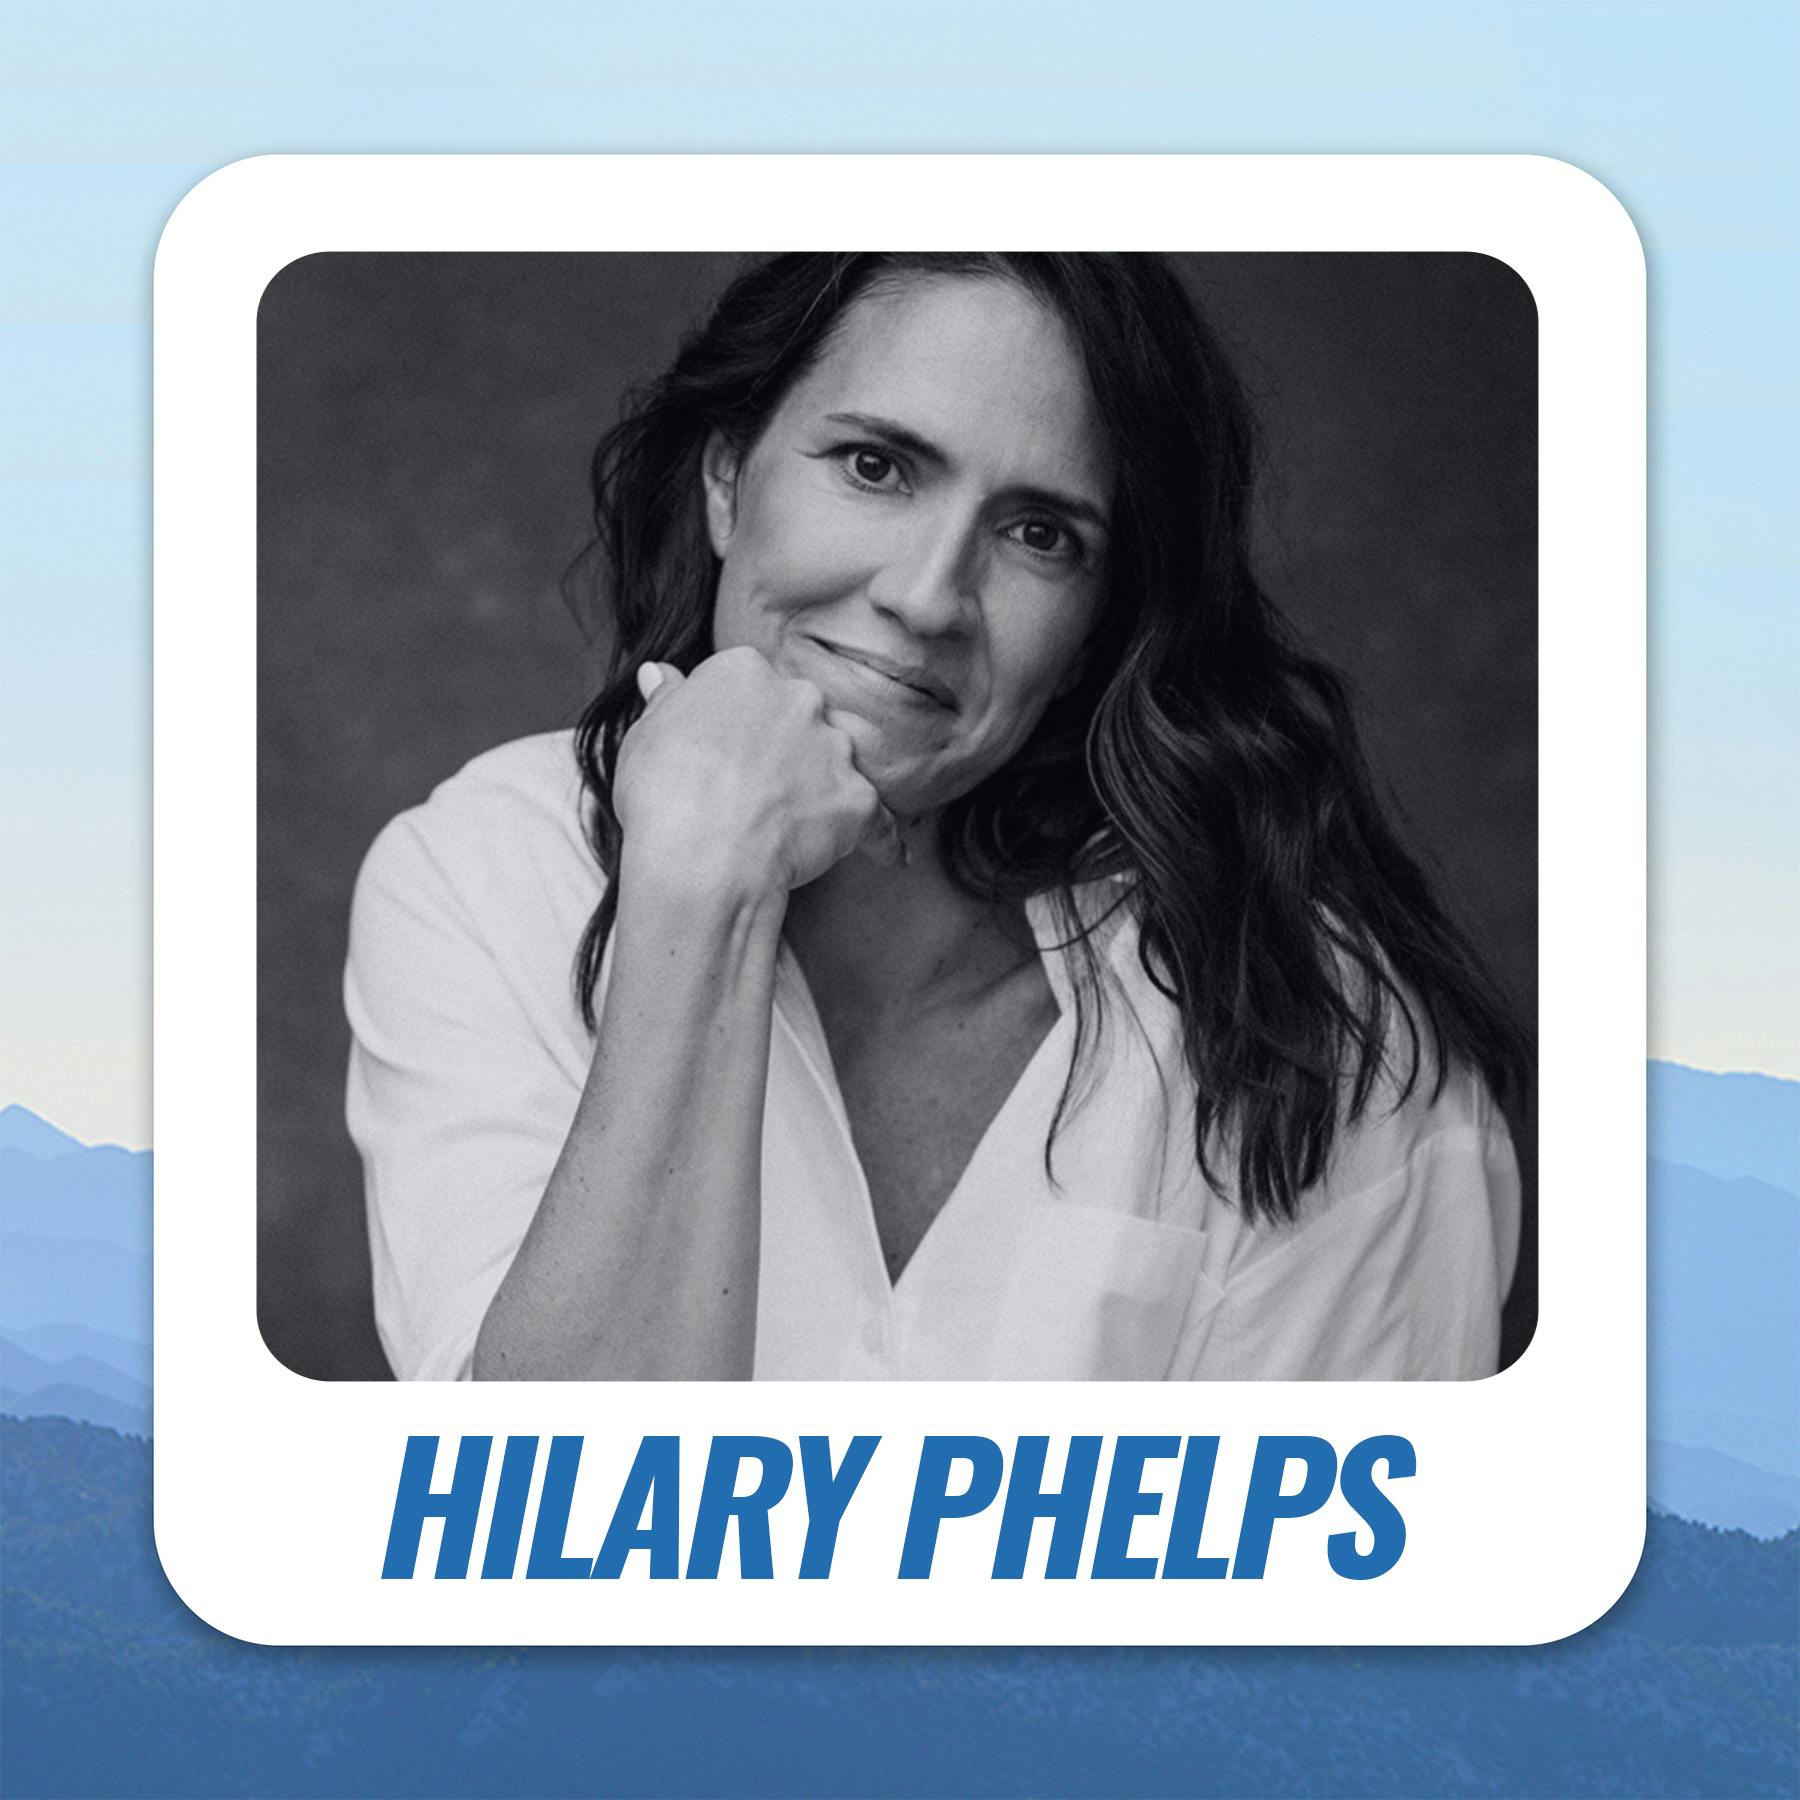 Empowerment and Purpose: A World Class Swimmers Journey through Addiction with Hilary Phelps